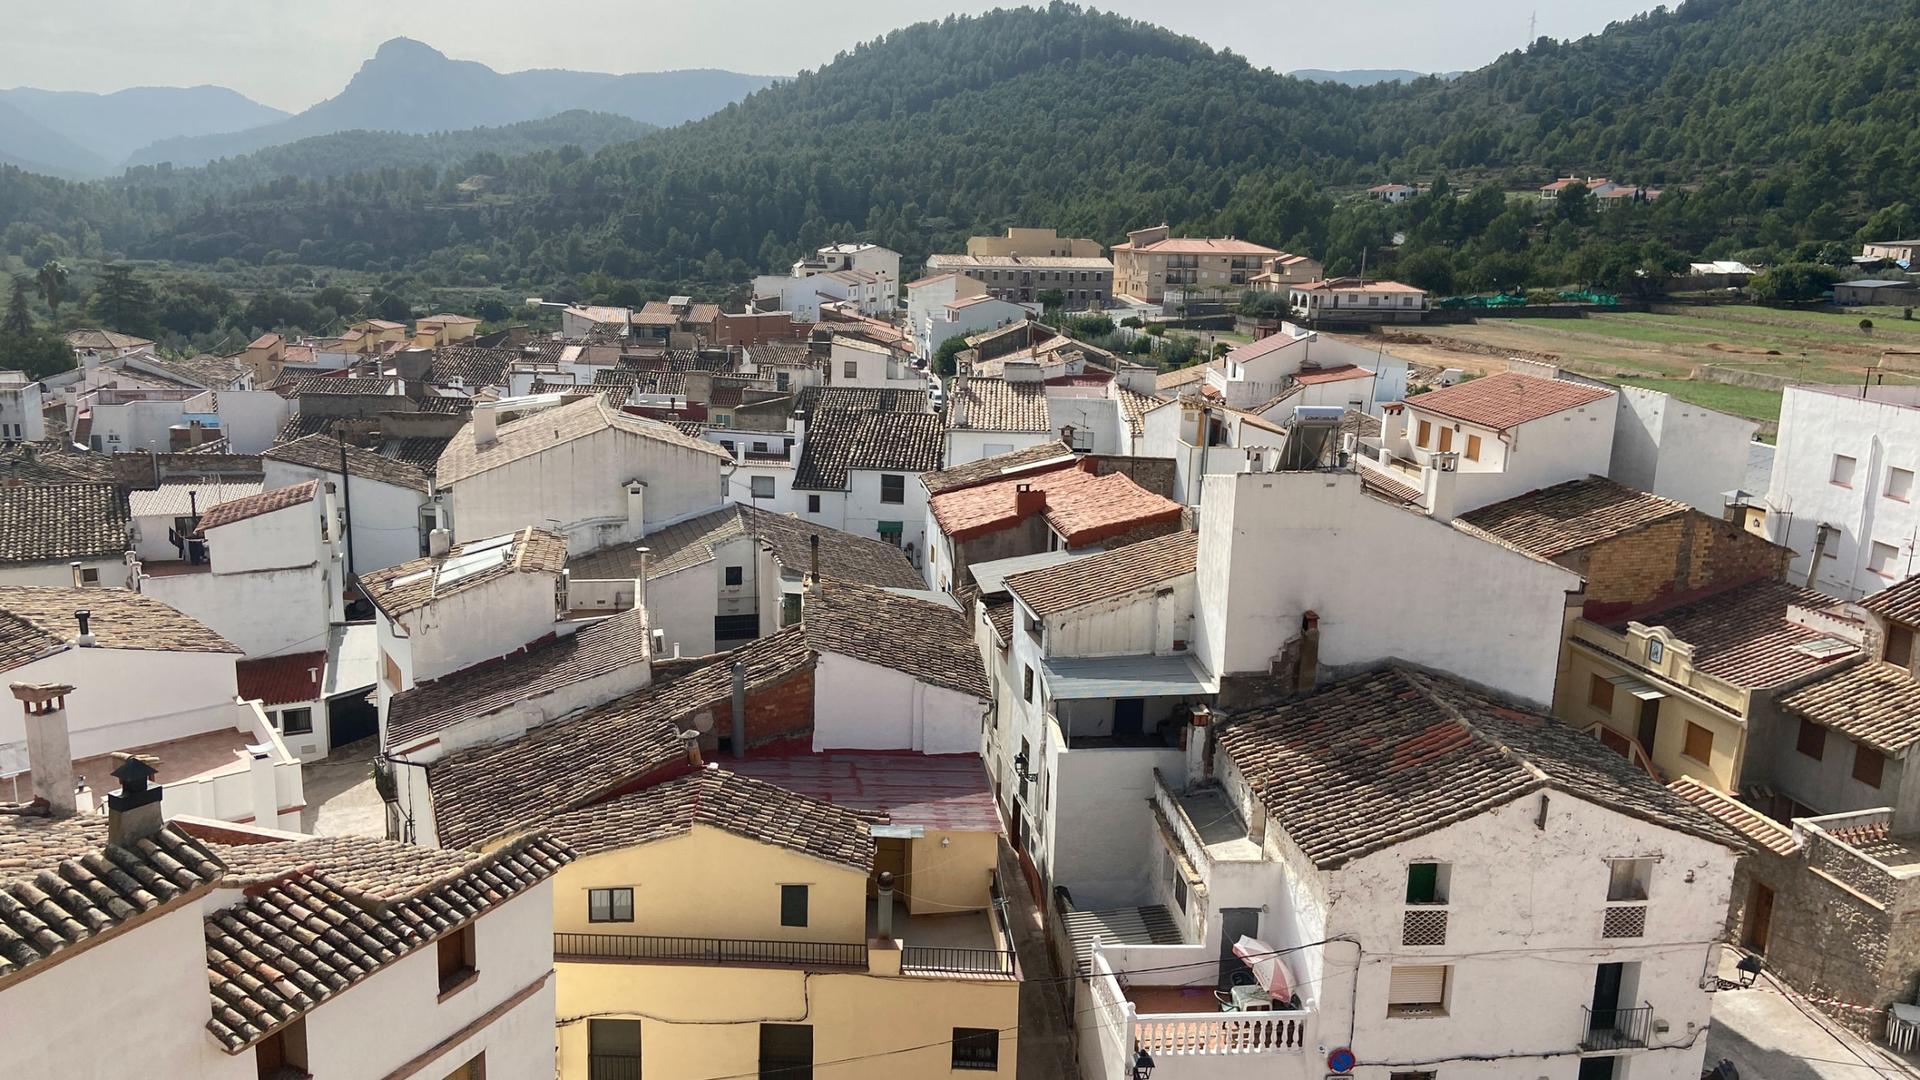 Argelita, in northeast Spain, has about 100 permanent residents. Among them, 11 kids, enough to open a school. Now more families want to move there.